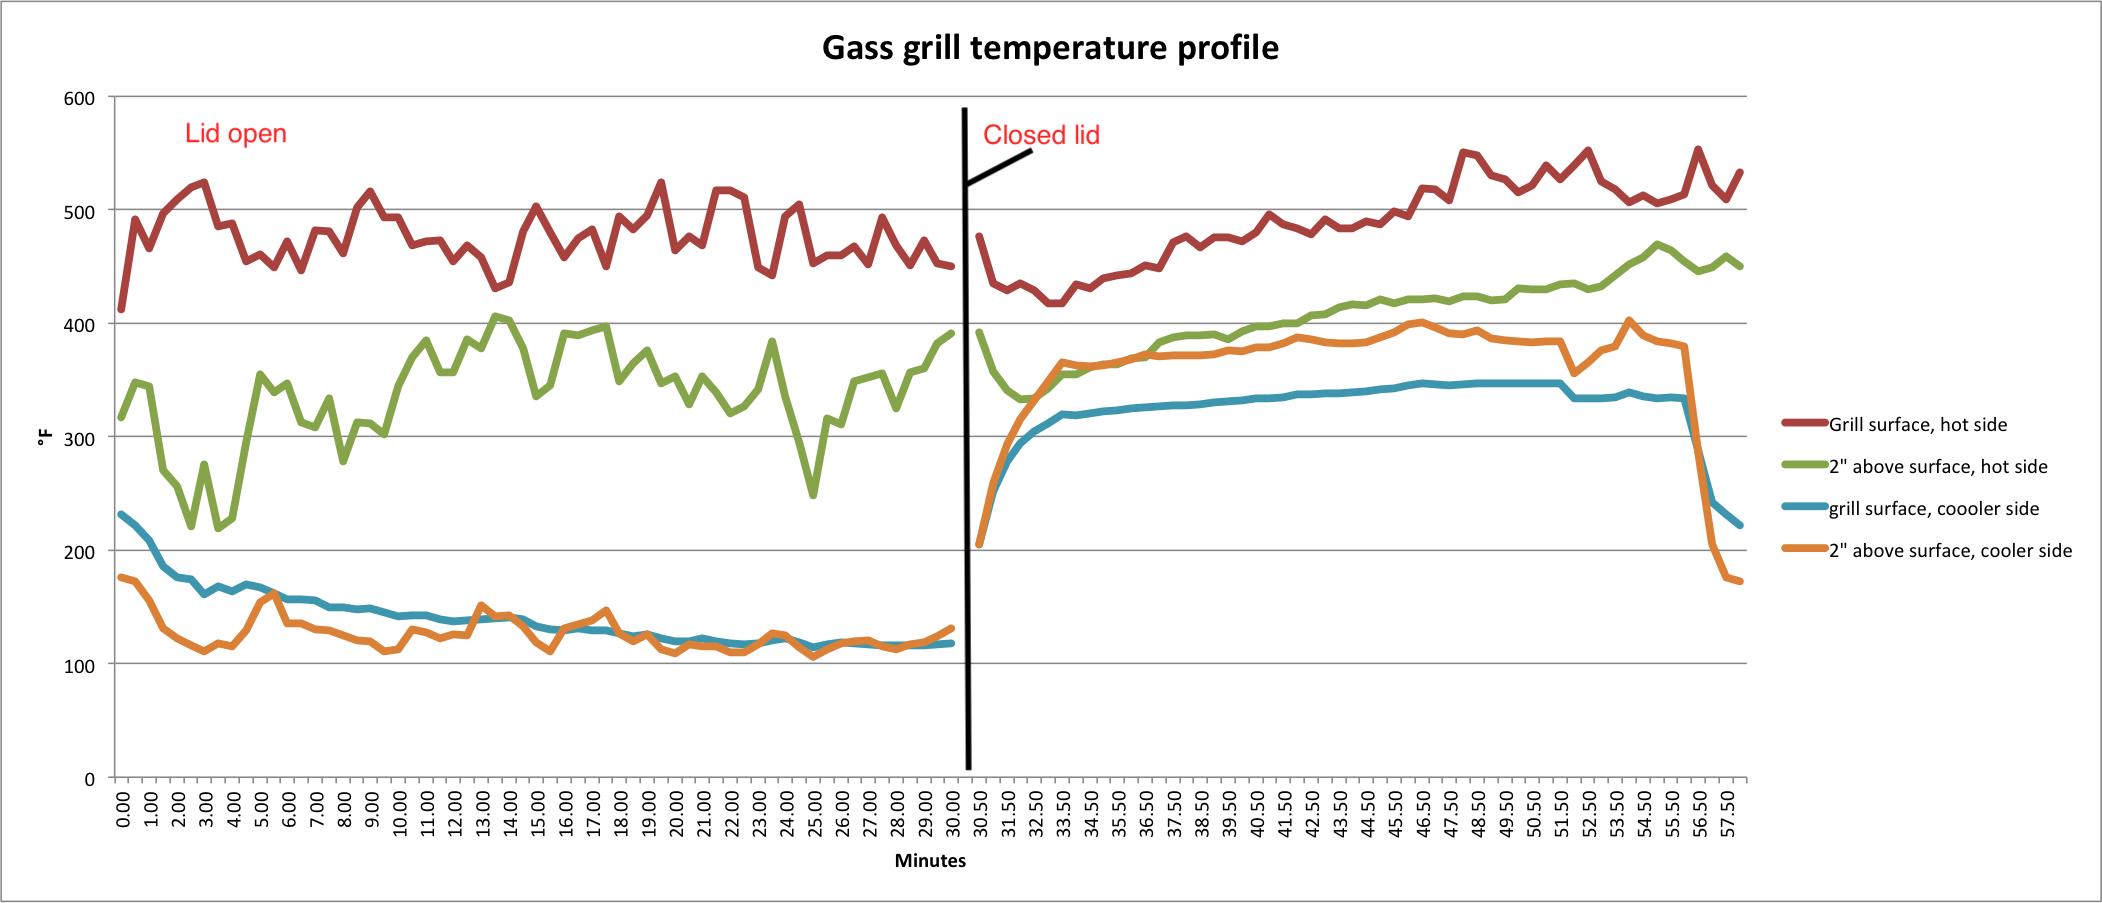 https://blog.thermoworks.com/wp-content/uploads/2018/07/gas-grill.png